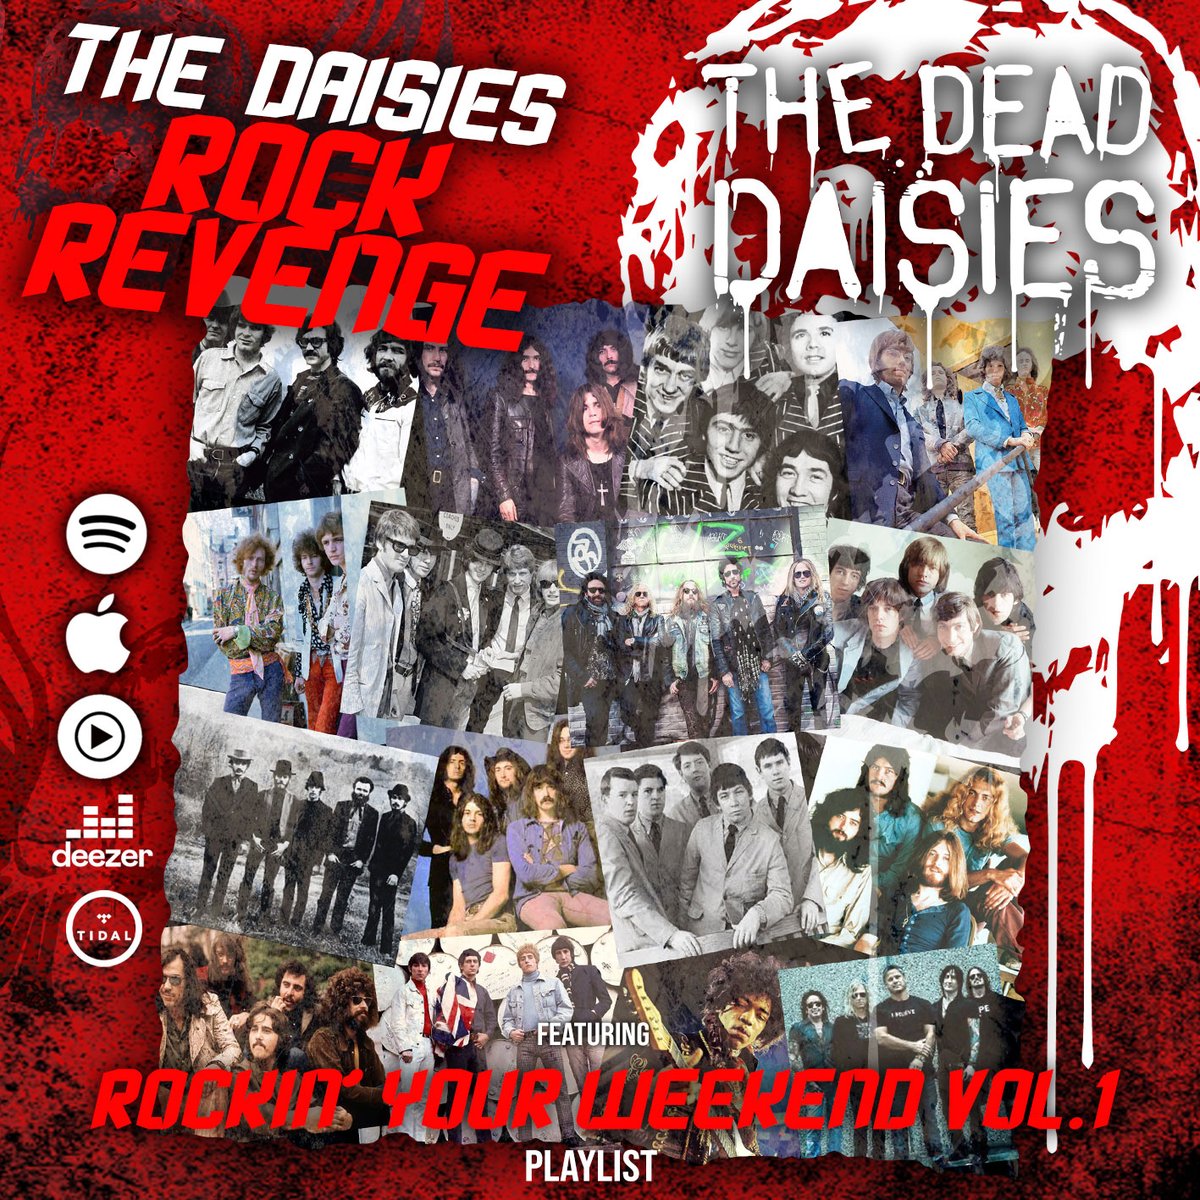 It’s time for a Rockin' Weekend!!🤘🚀🤘
We put this playlist together for you to enjoy!🏋️‍♂️😎
Crank it up & stream these classic 60’s hits!⚡🚀⚡
thedeaddaisies.com/daisies-rock-r…

#TheDeadDaisies #TheDaisiesRockRevenge #RockinYourWeekend #Playlist #Spotify #AppleMusic #YouTubeMusic #Deezer